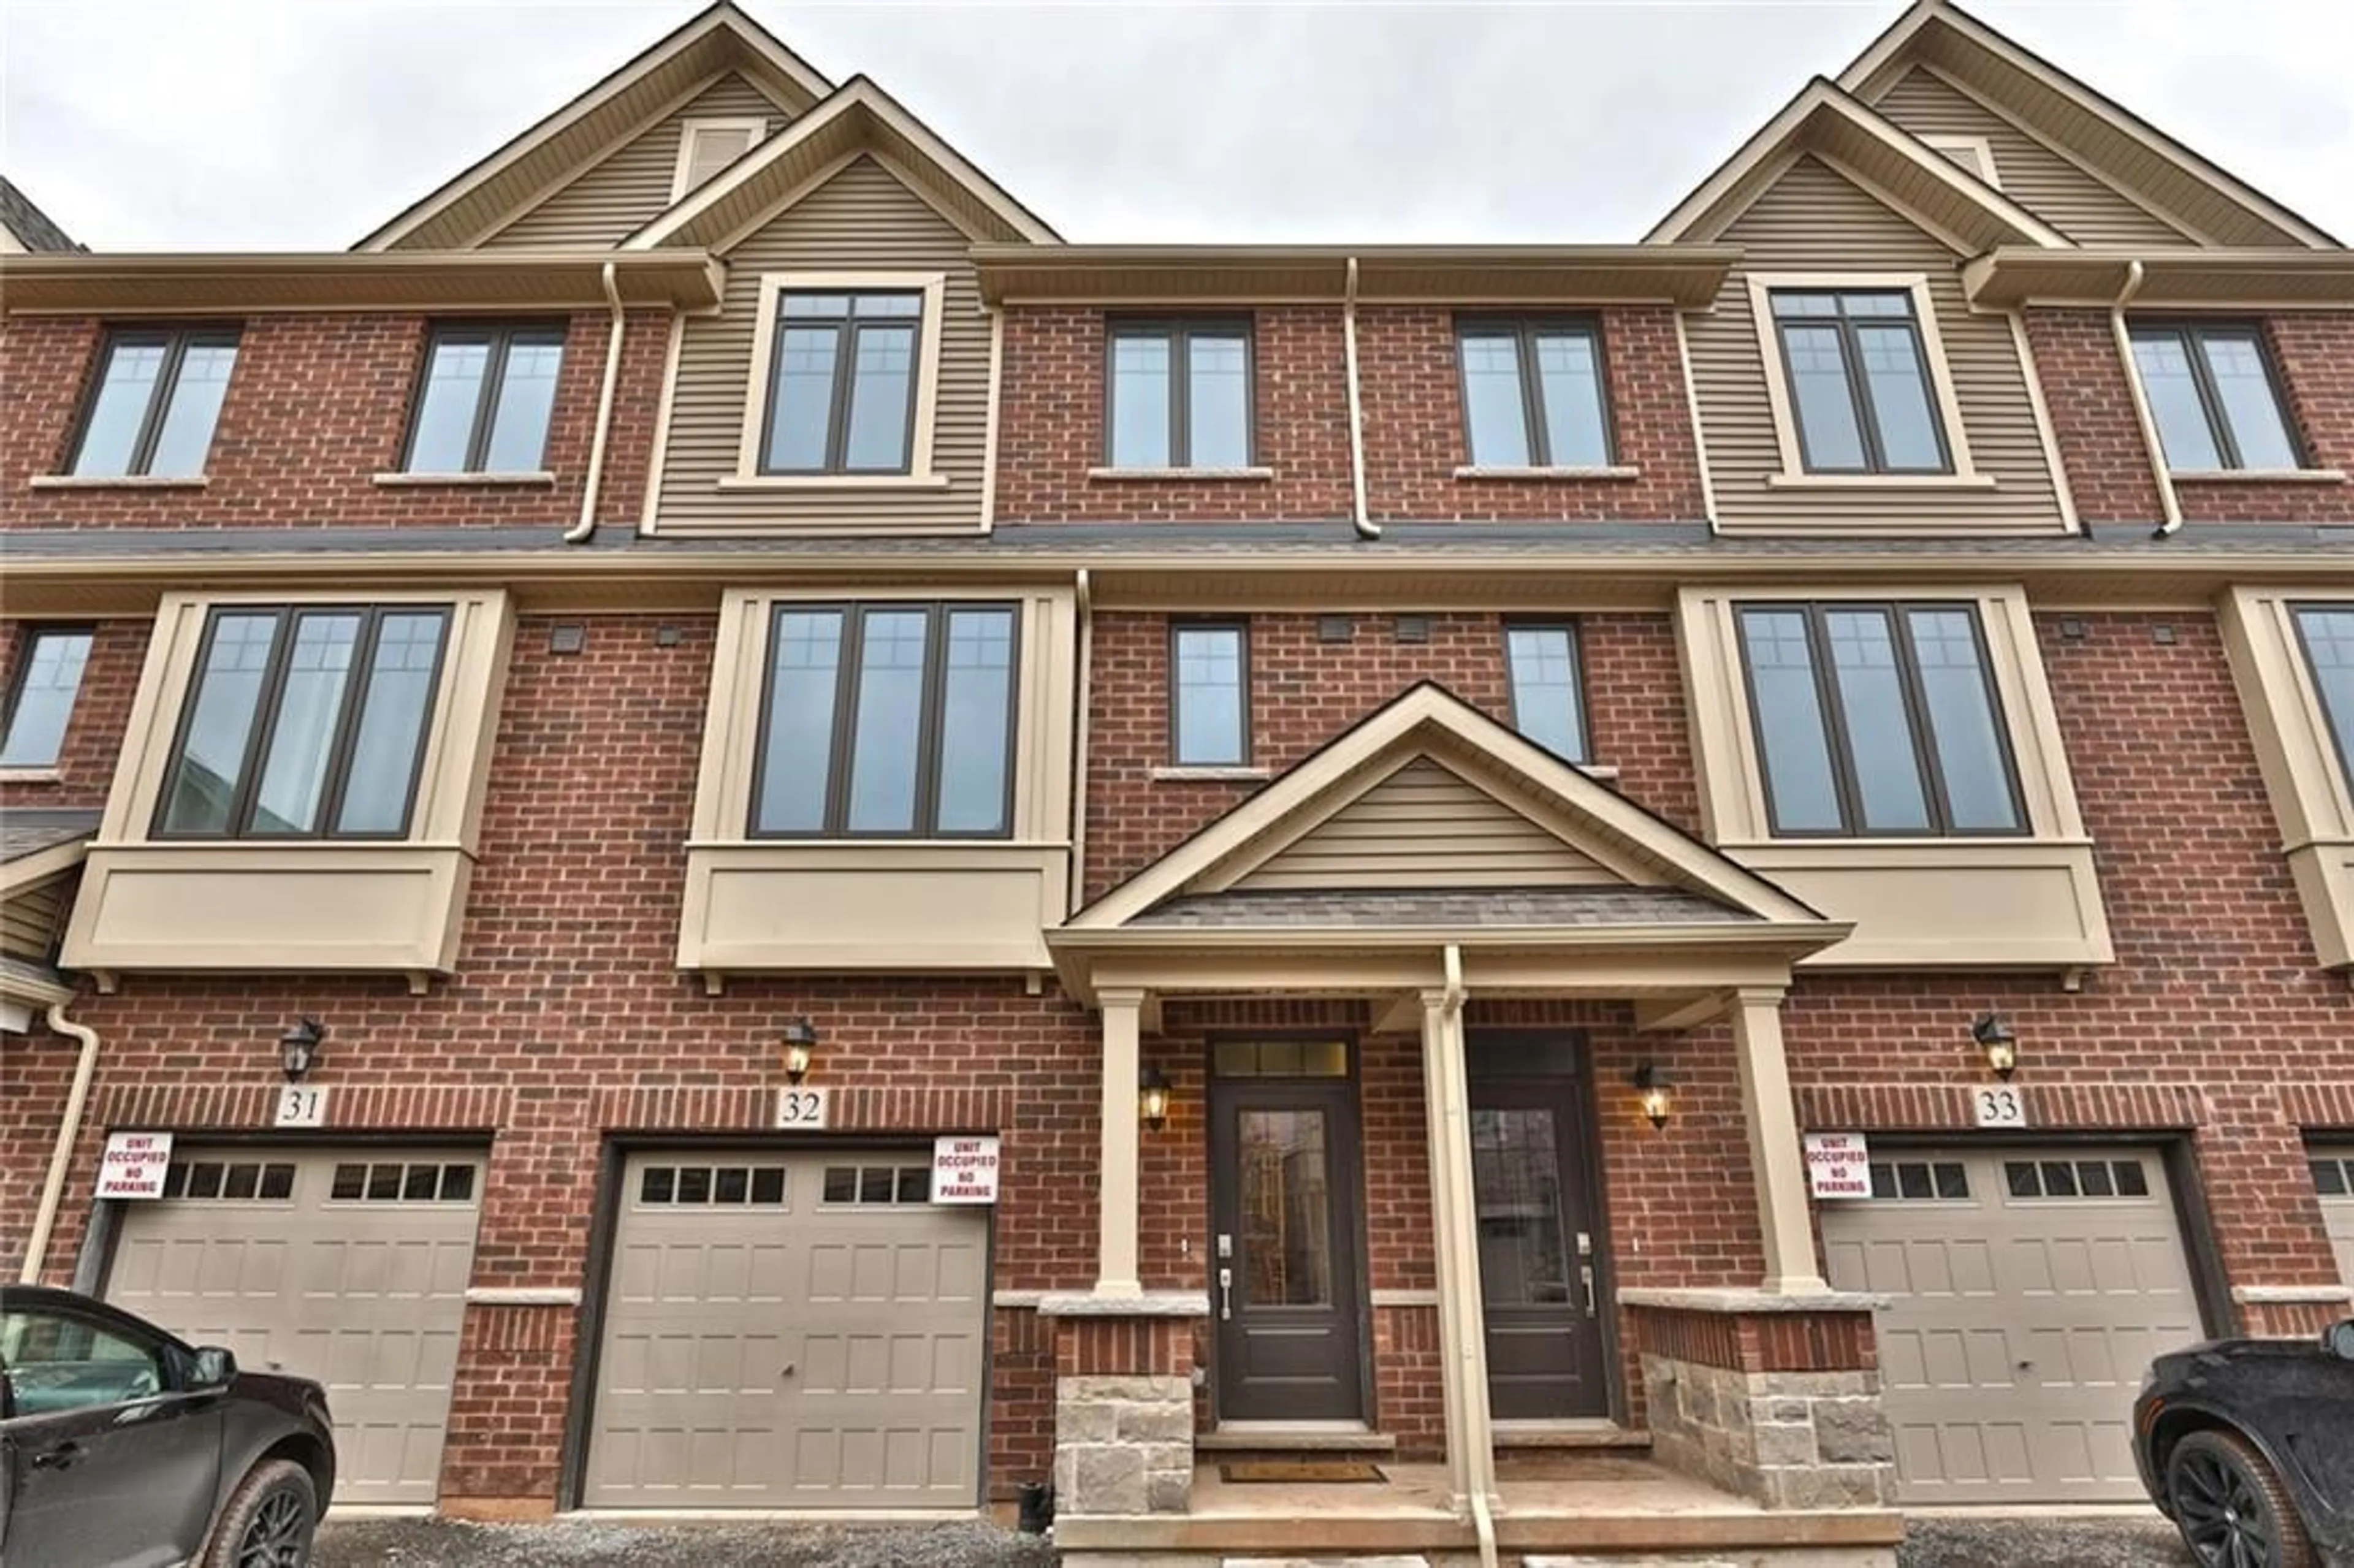 Home with brick exterior material for 288 GLOVER Rd #32, Stoney Creek Ontario L8E 5H6